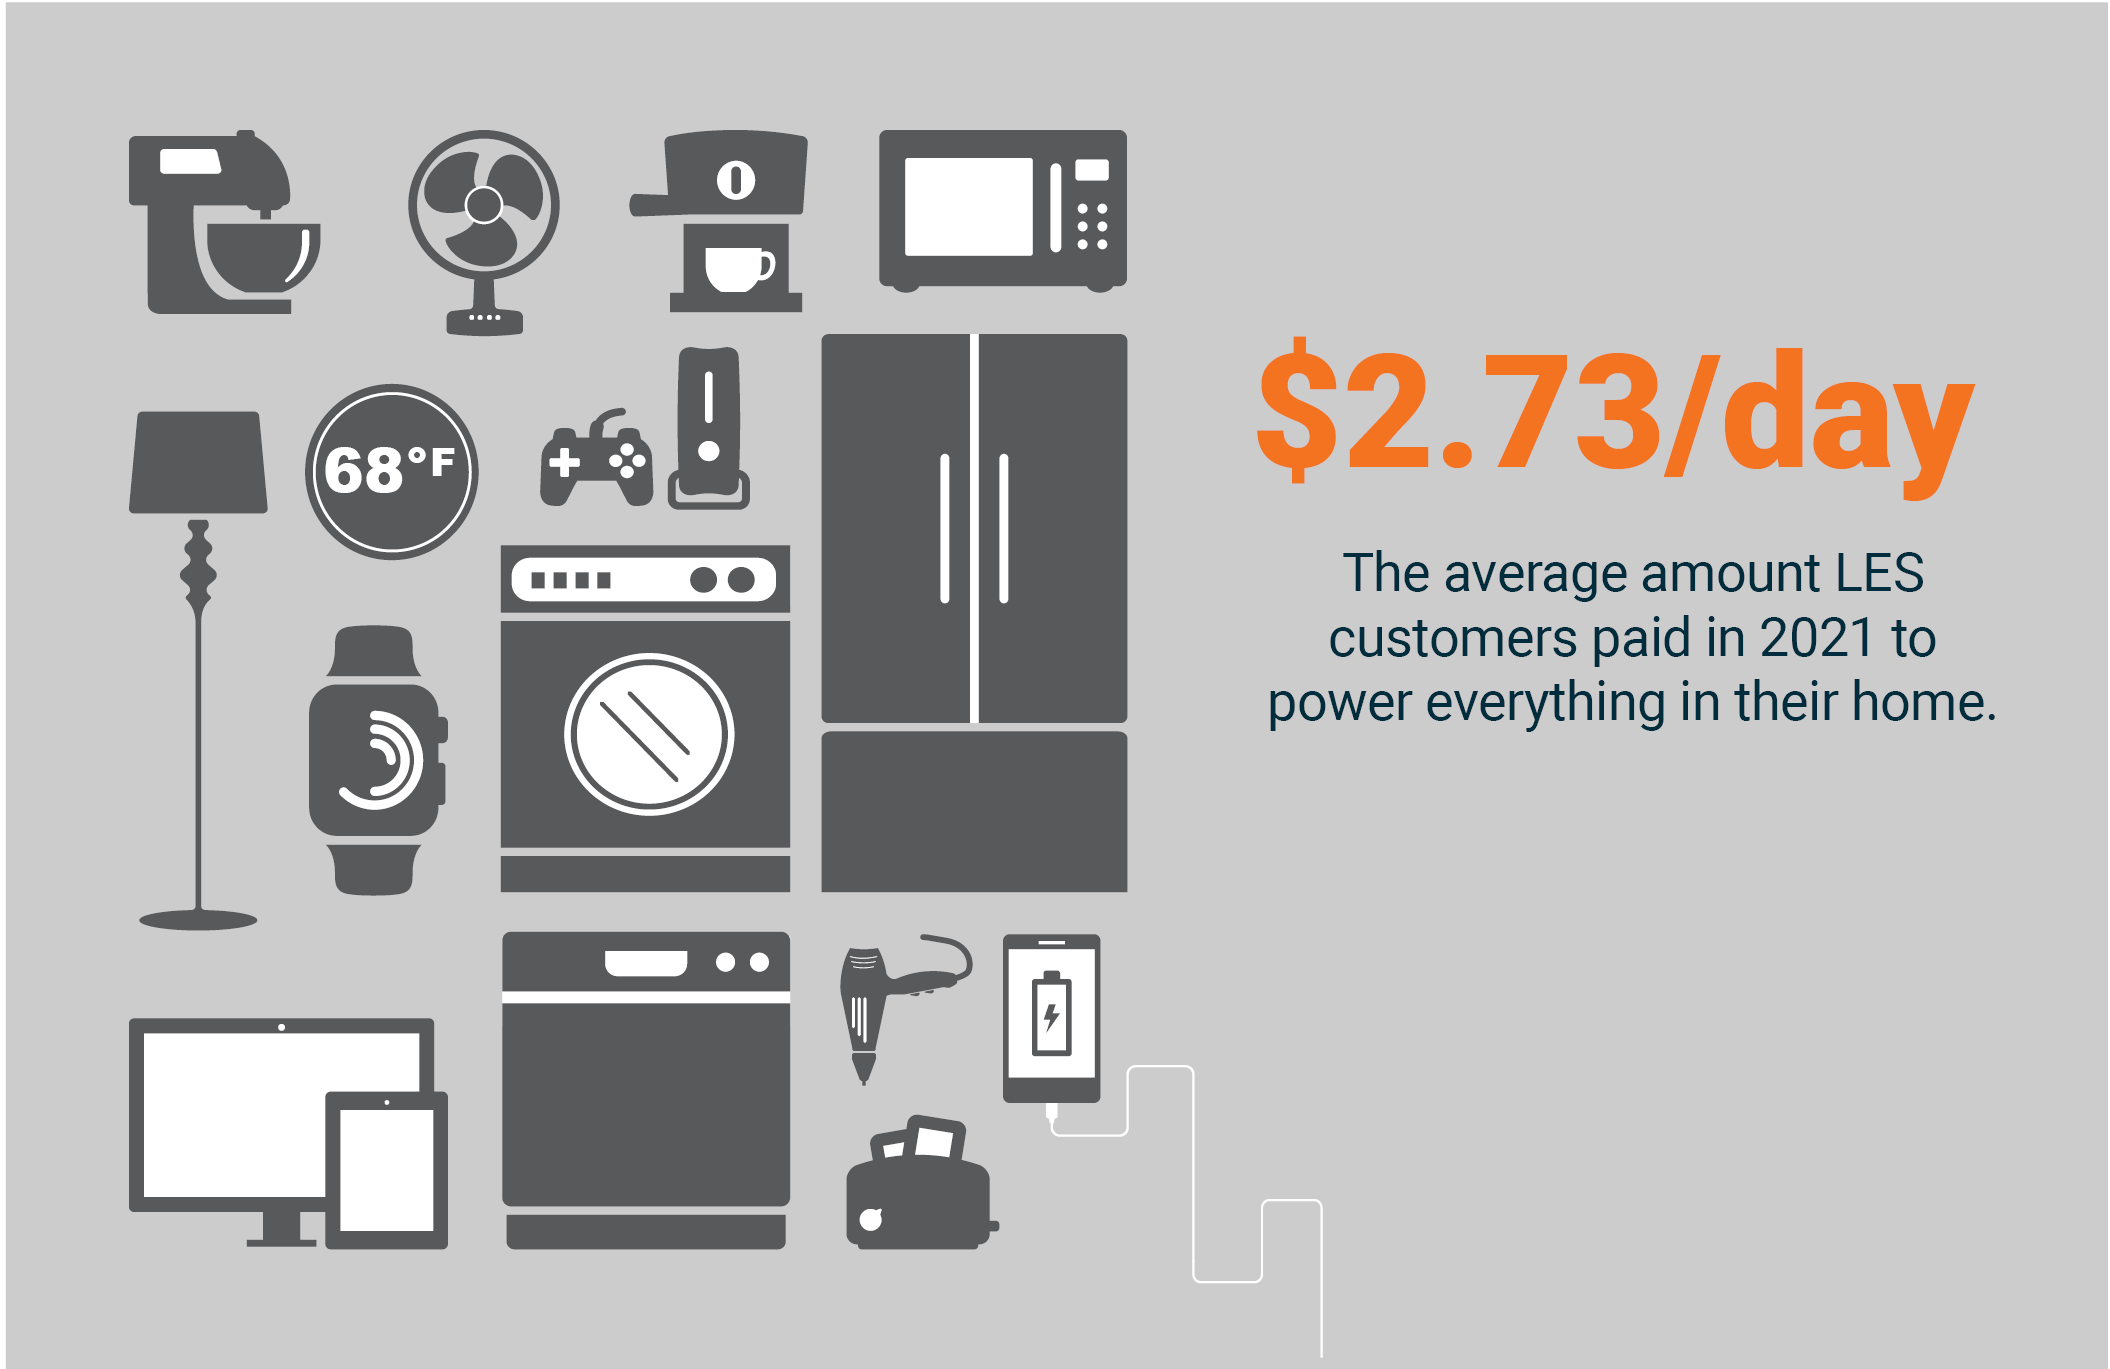 $2.73 per day is the average amount LES customers paid in 2021 to power everything in their home